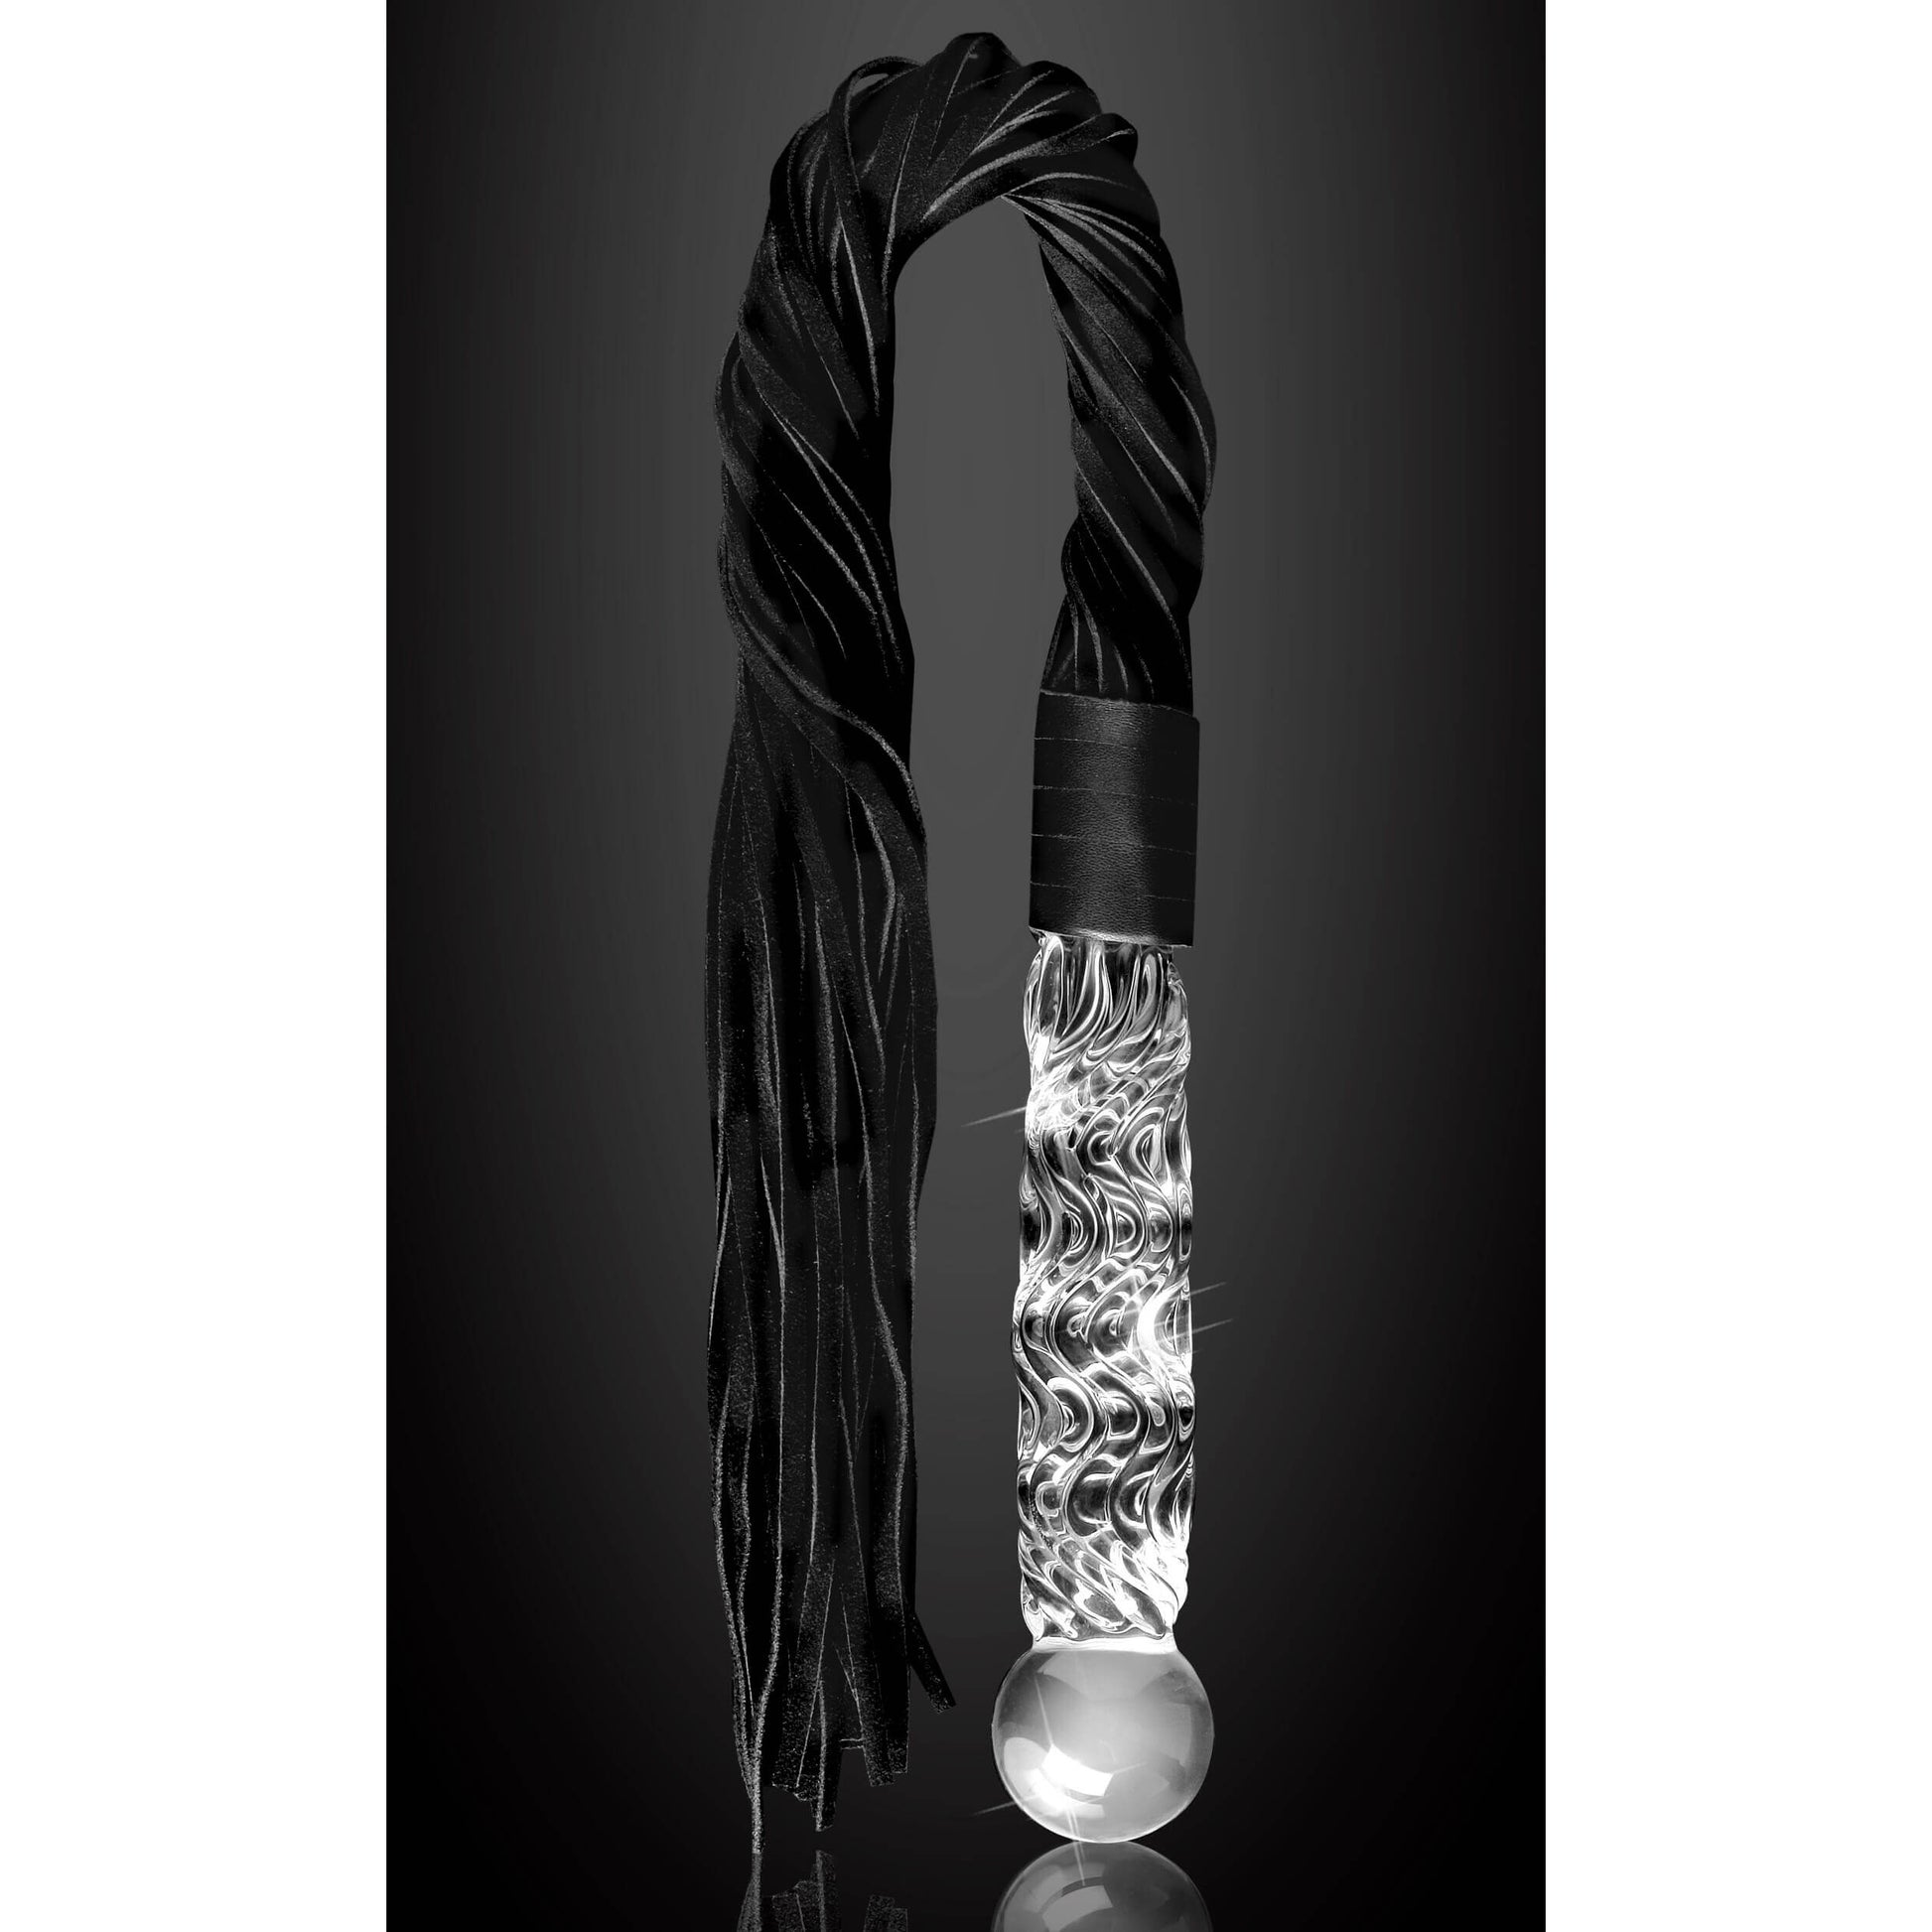 Icicles No. 38 - Glass Flogger and Dildo - by The Bigger O online sex toy shop. USA, Canada and UK shipping available.